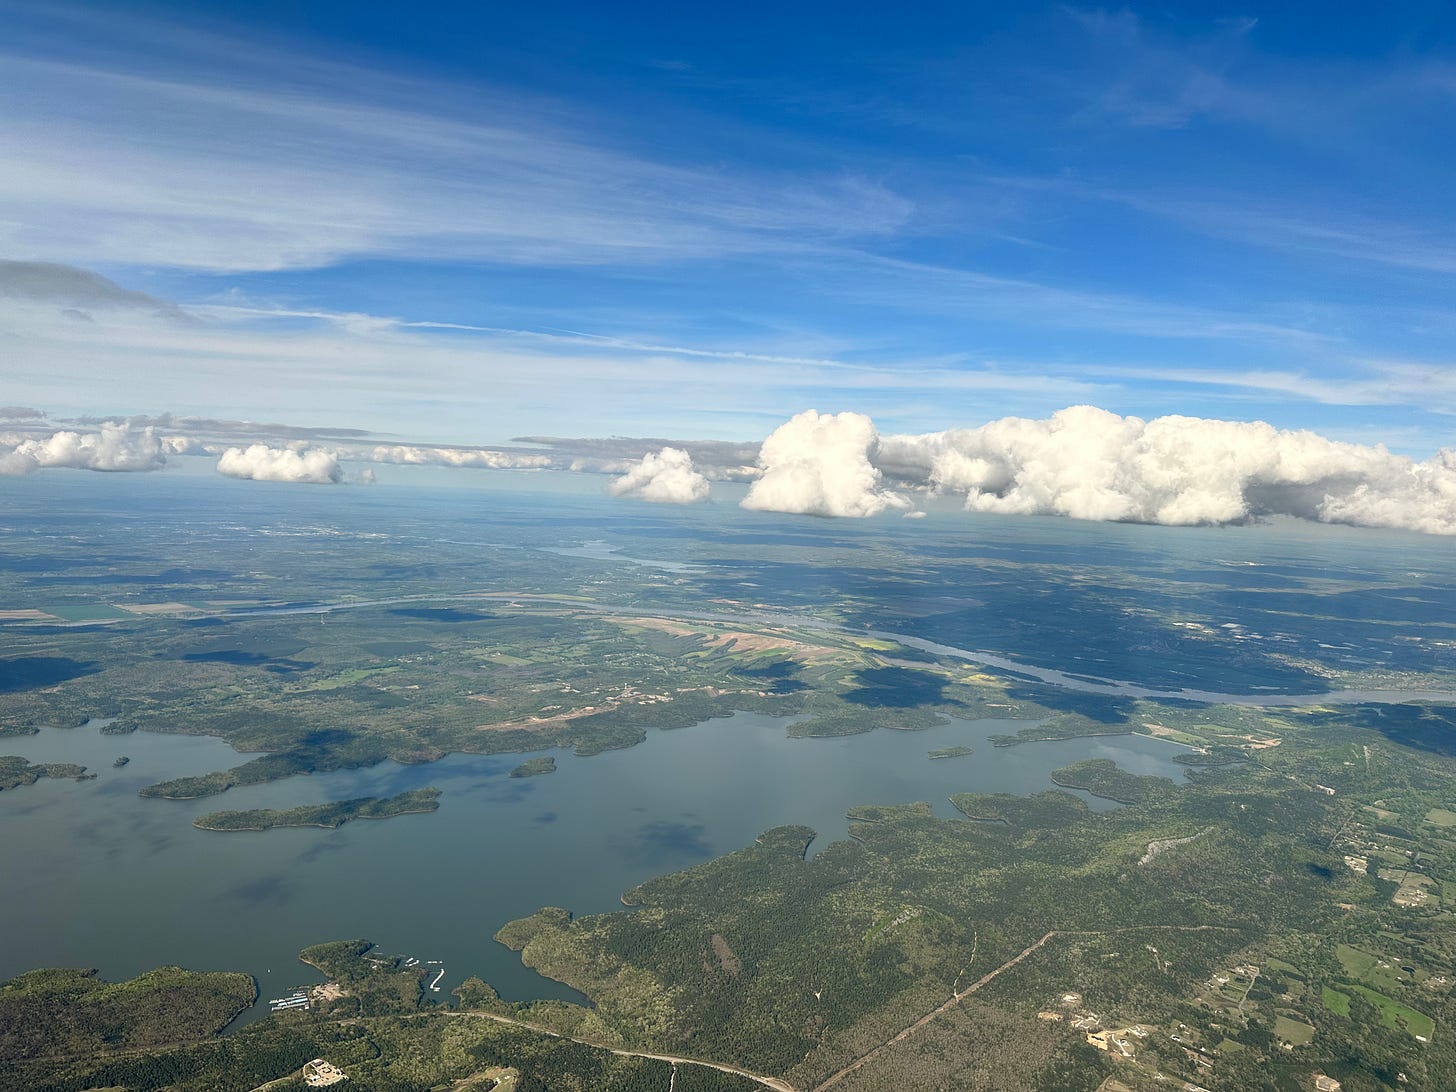 View from airplane overlooking Little Rock Arkansas region at cloud level. Water and green below, blue sky above, flat-bottomed white clouds splitting the view horizontally in the middle. 